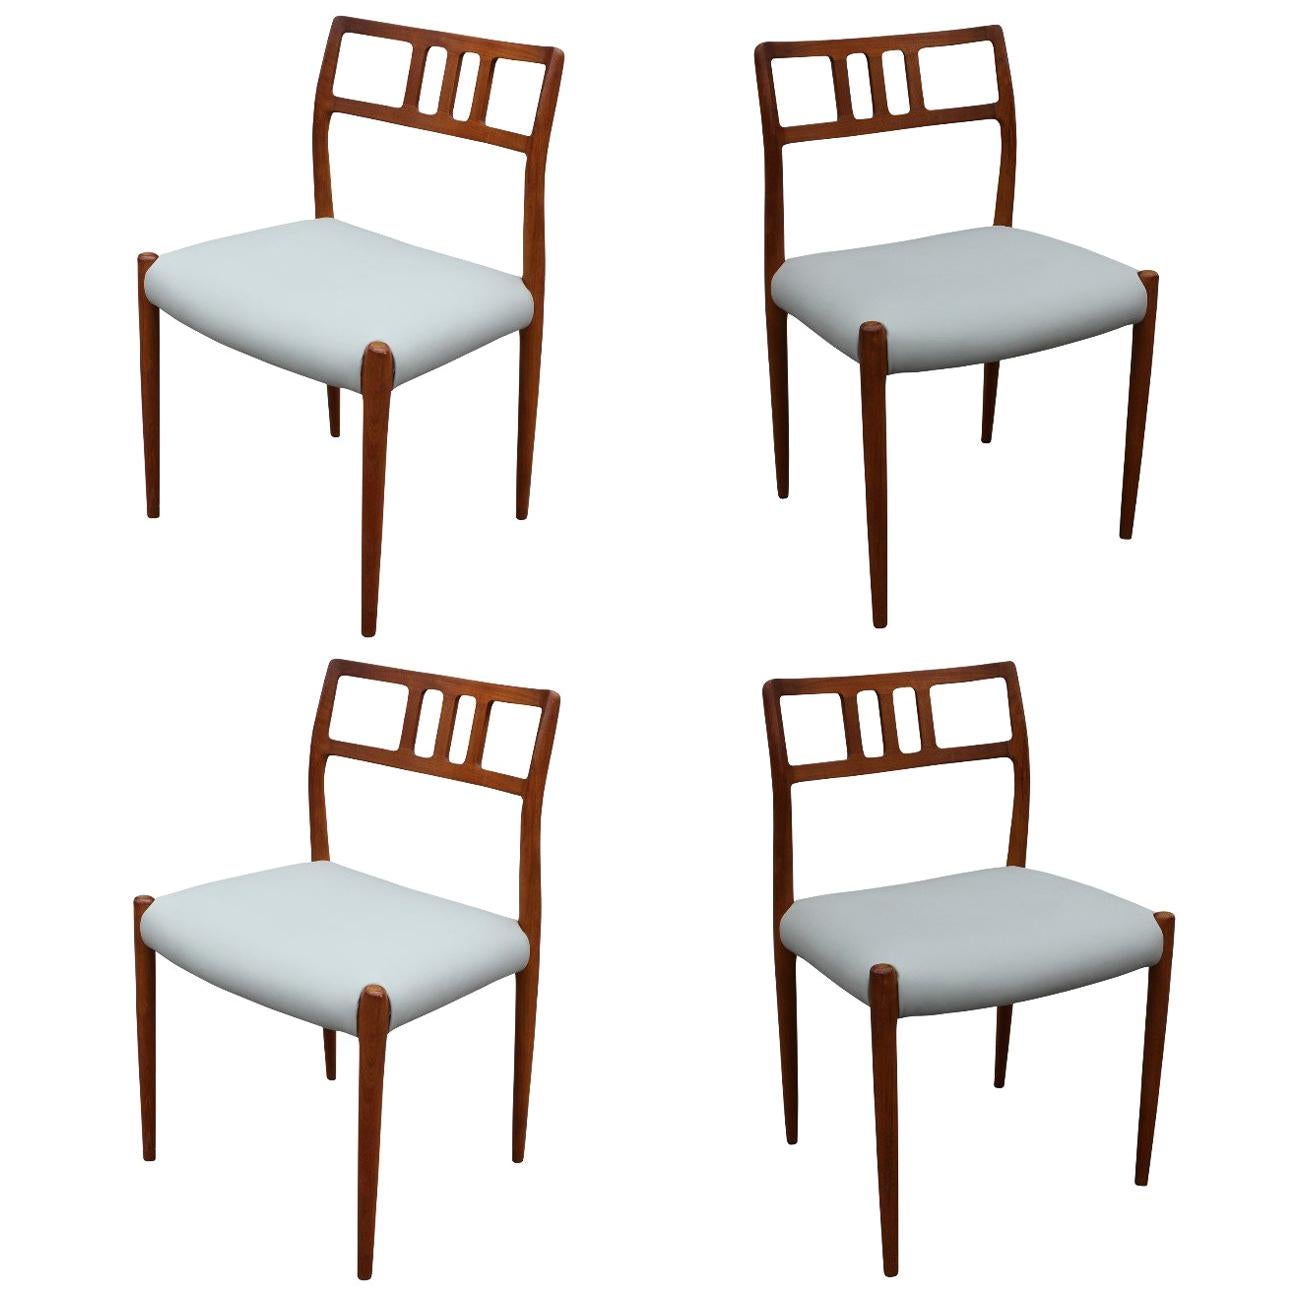 Set of Four Danish Teak Dining Chairs # 79 by J L Moller With Spinneybeck Seats